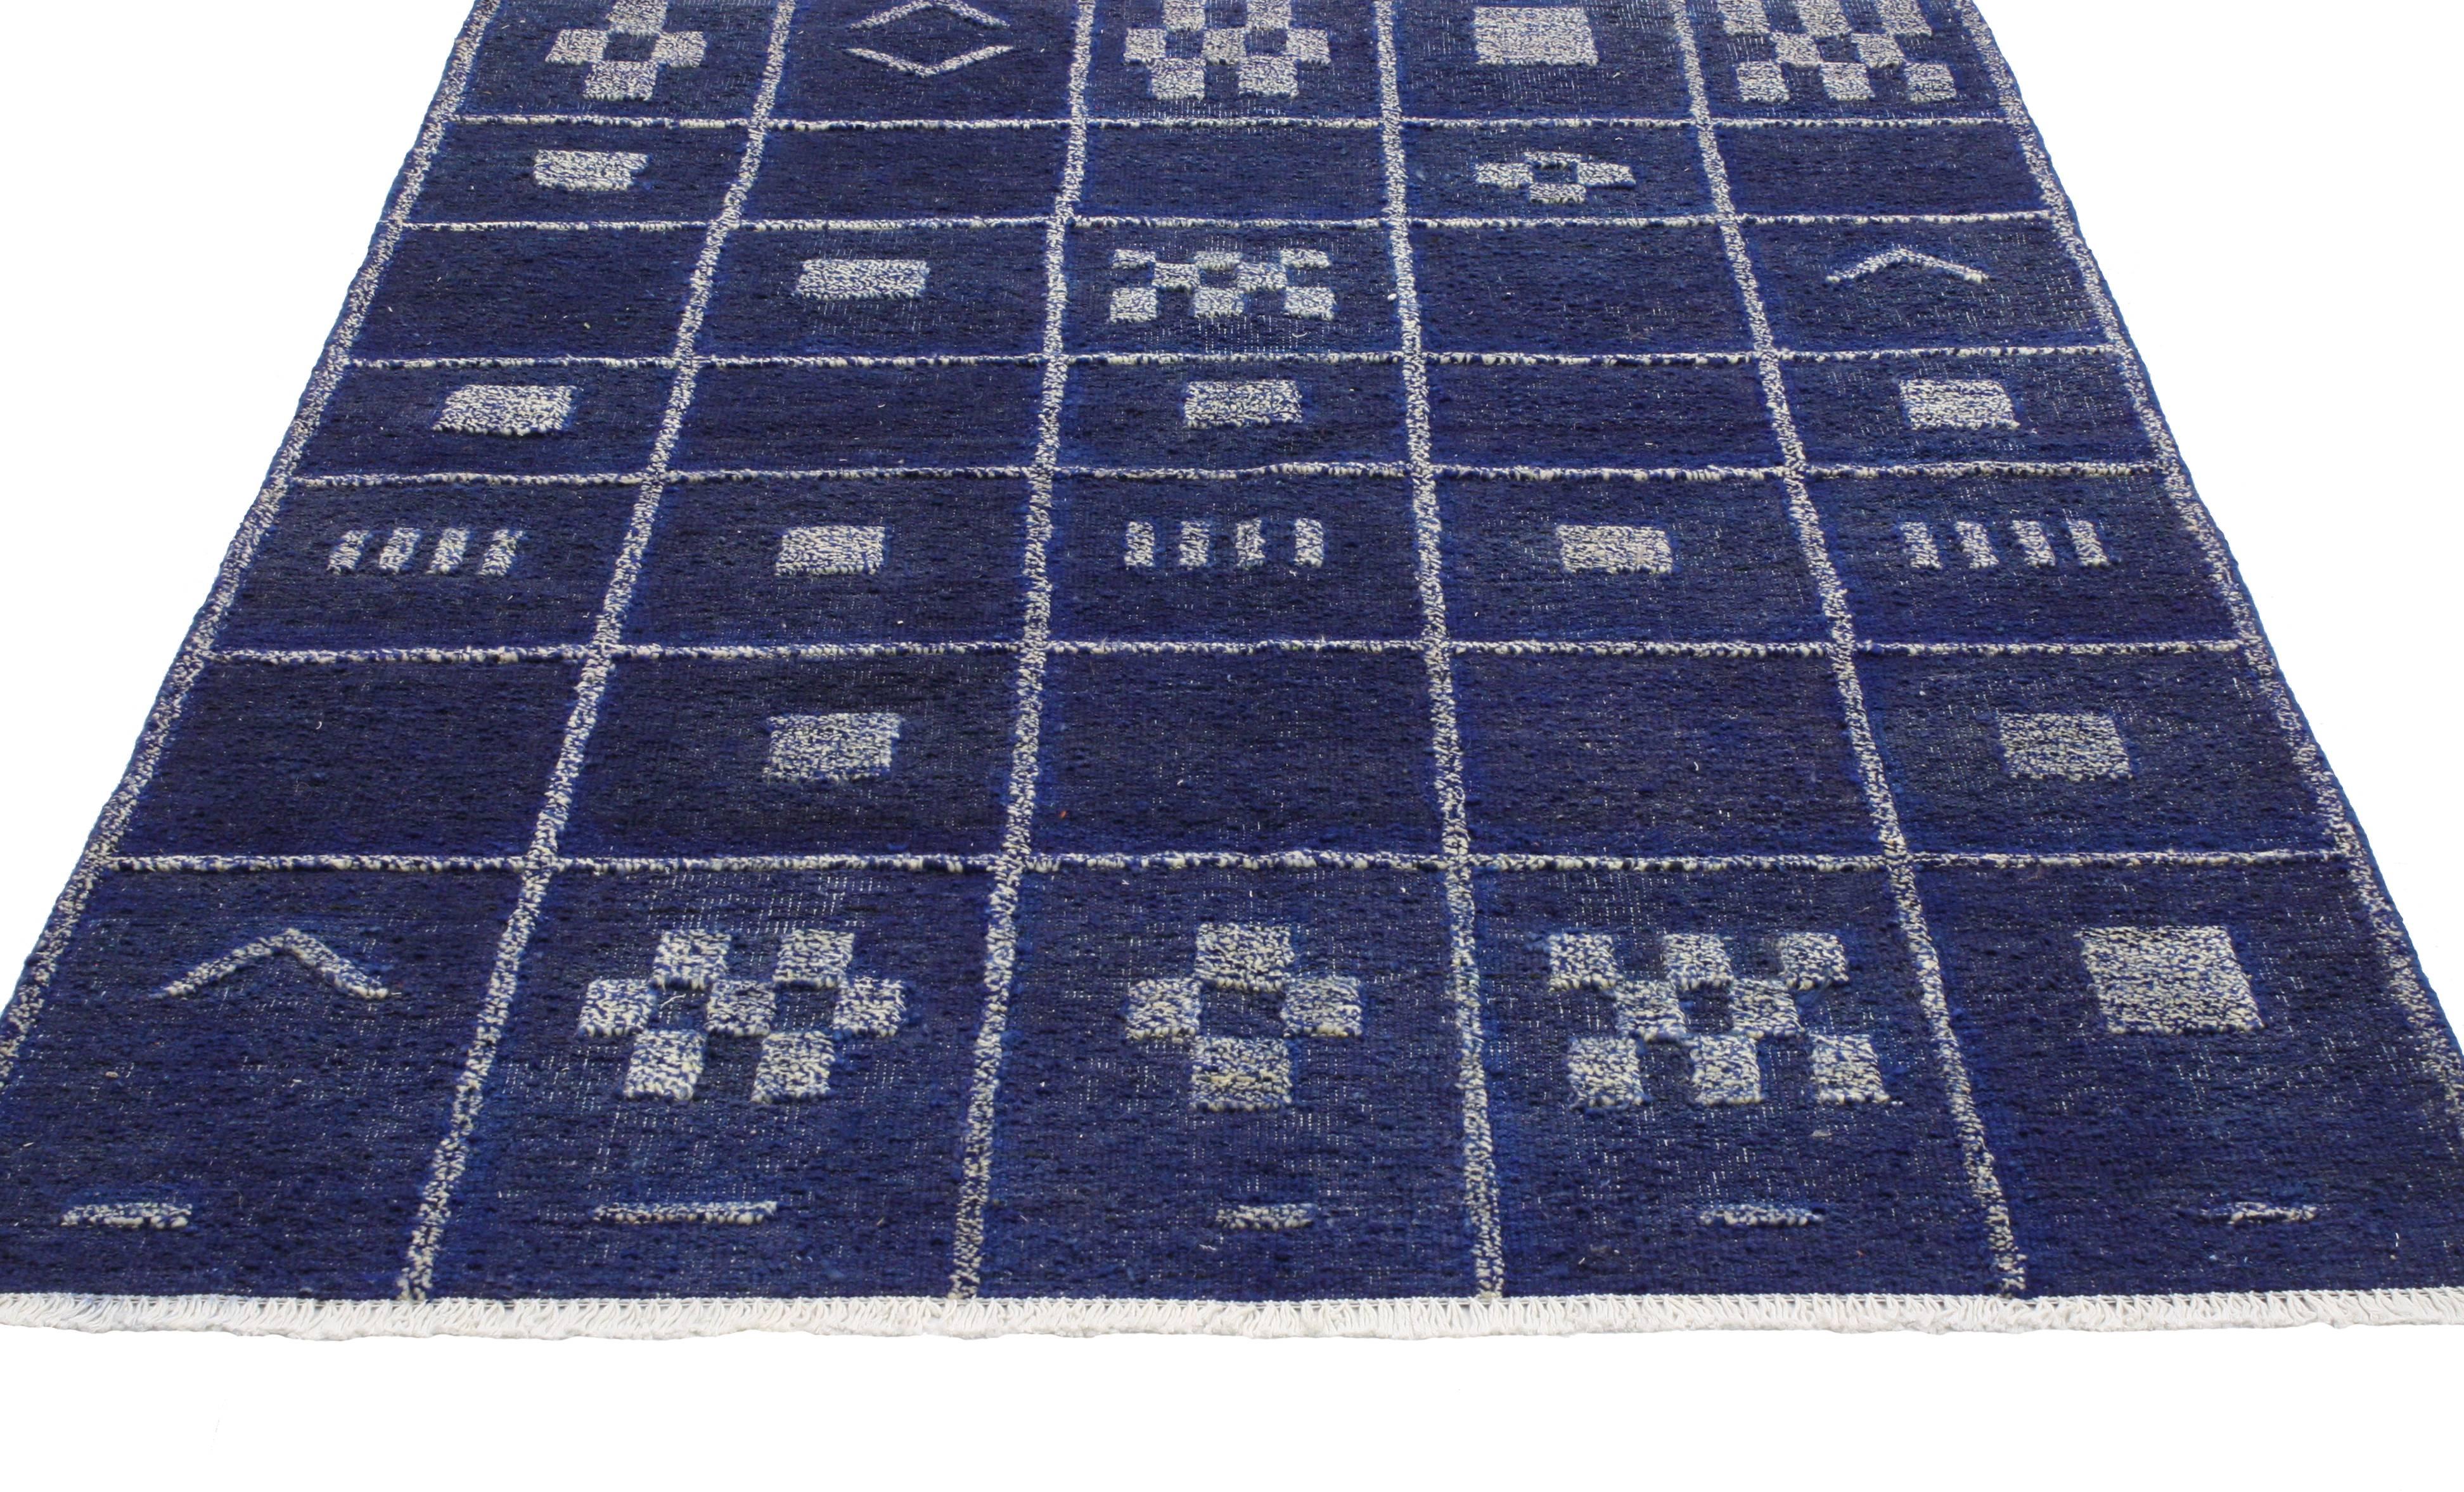 80281 Contemporary Moroccan Style Rug in Cobalt Blue High Low Pile, Two Layer Rug. Saturated in an extraordinary palette of cobalt blue, this Moroccan style rug showcases true simplistic style with a punch of color. The geometric motifs and linear